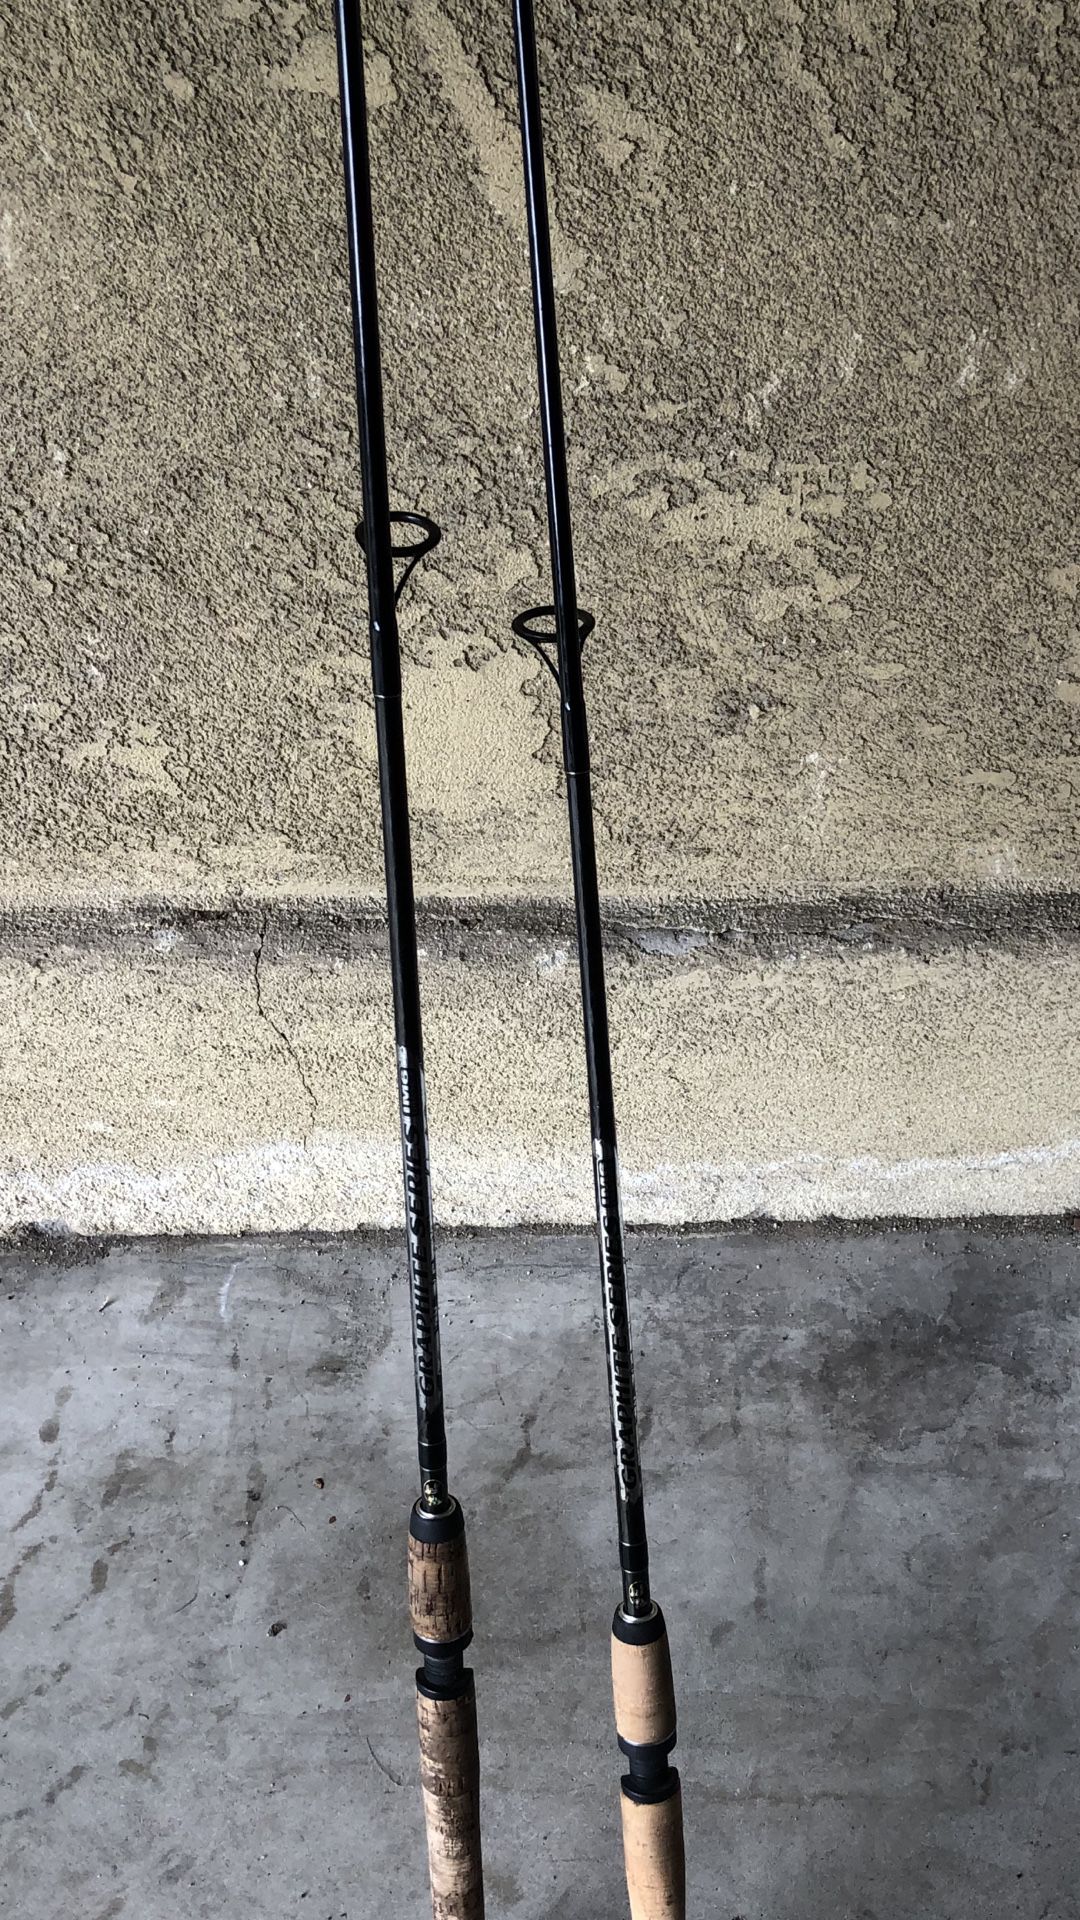 Two bass pro shops graphite series spinning rods